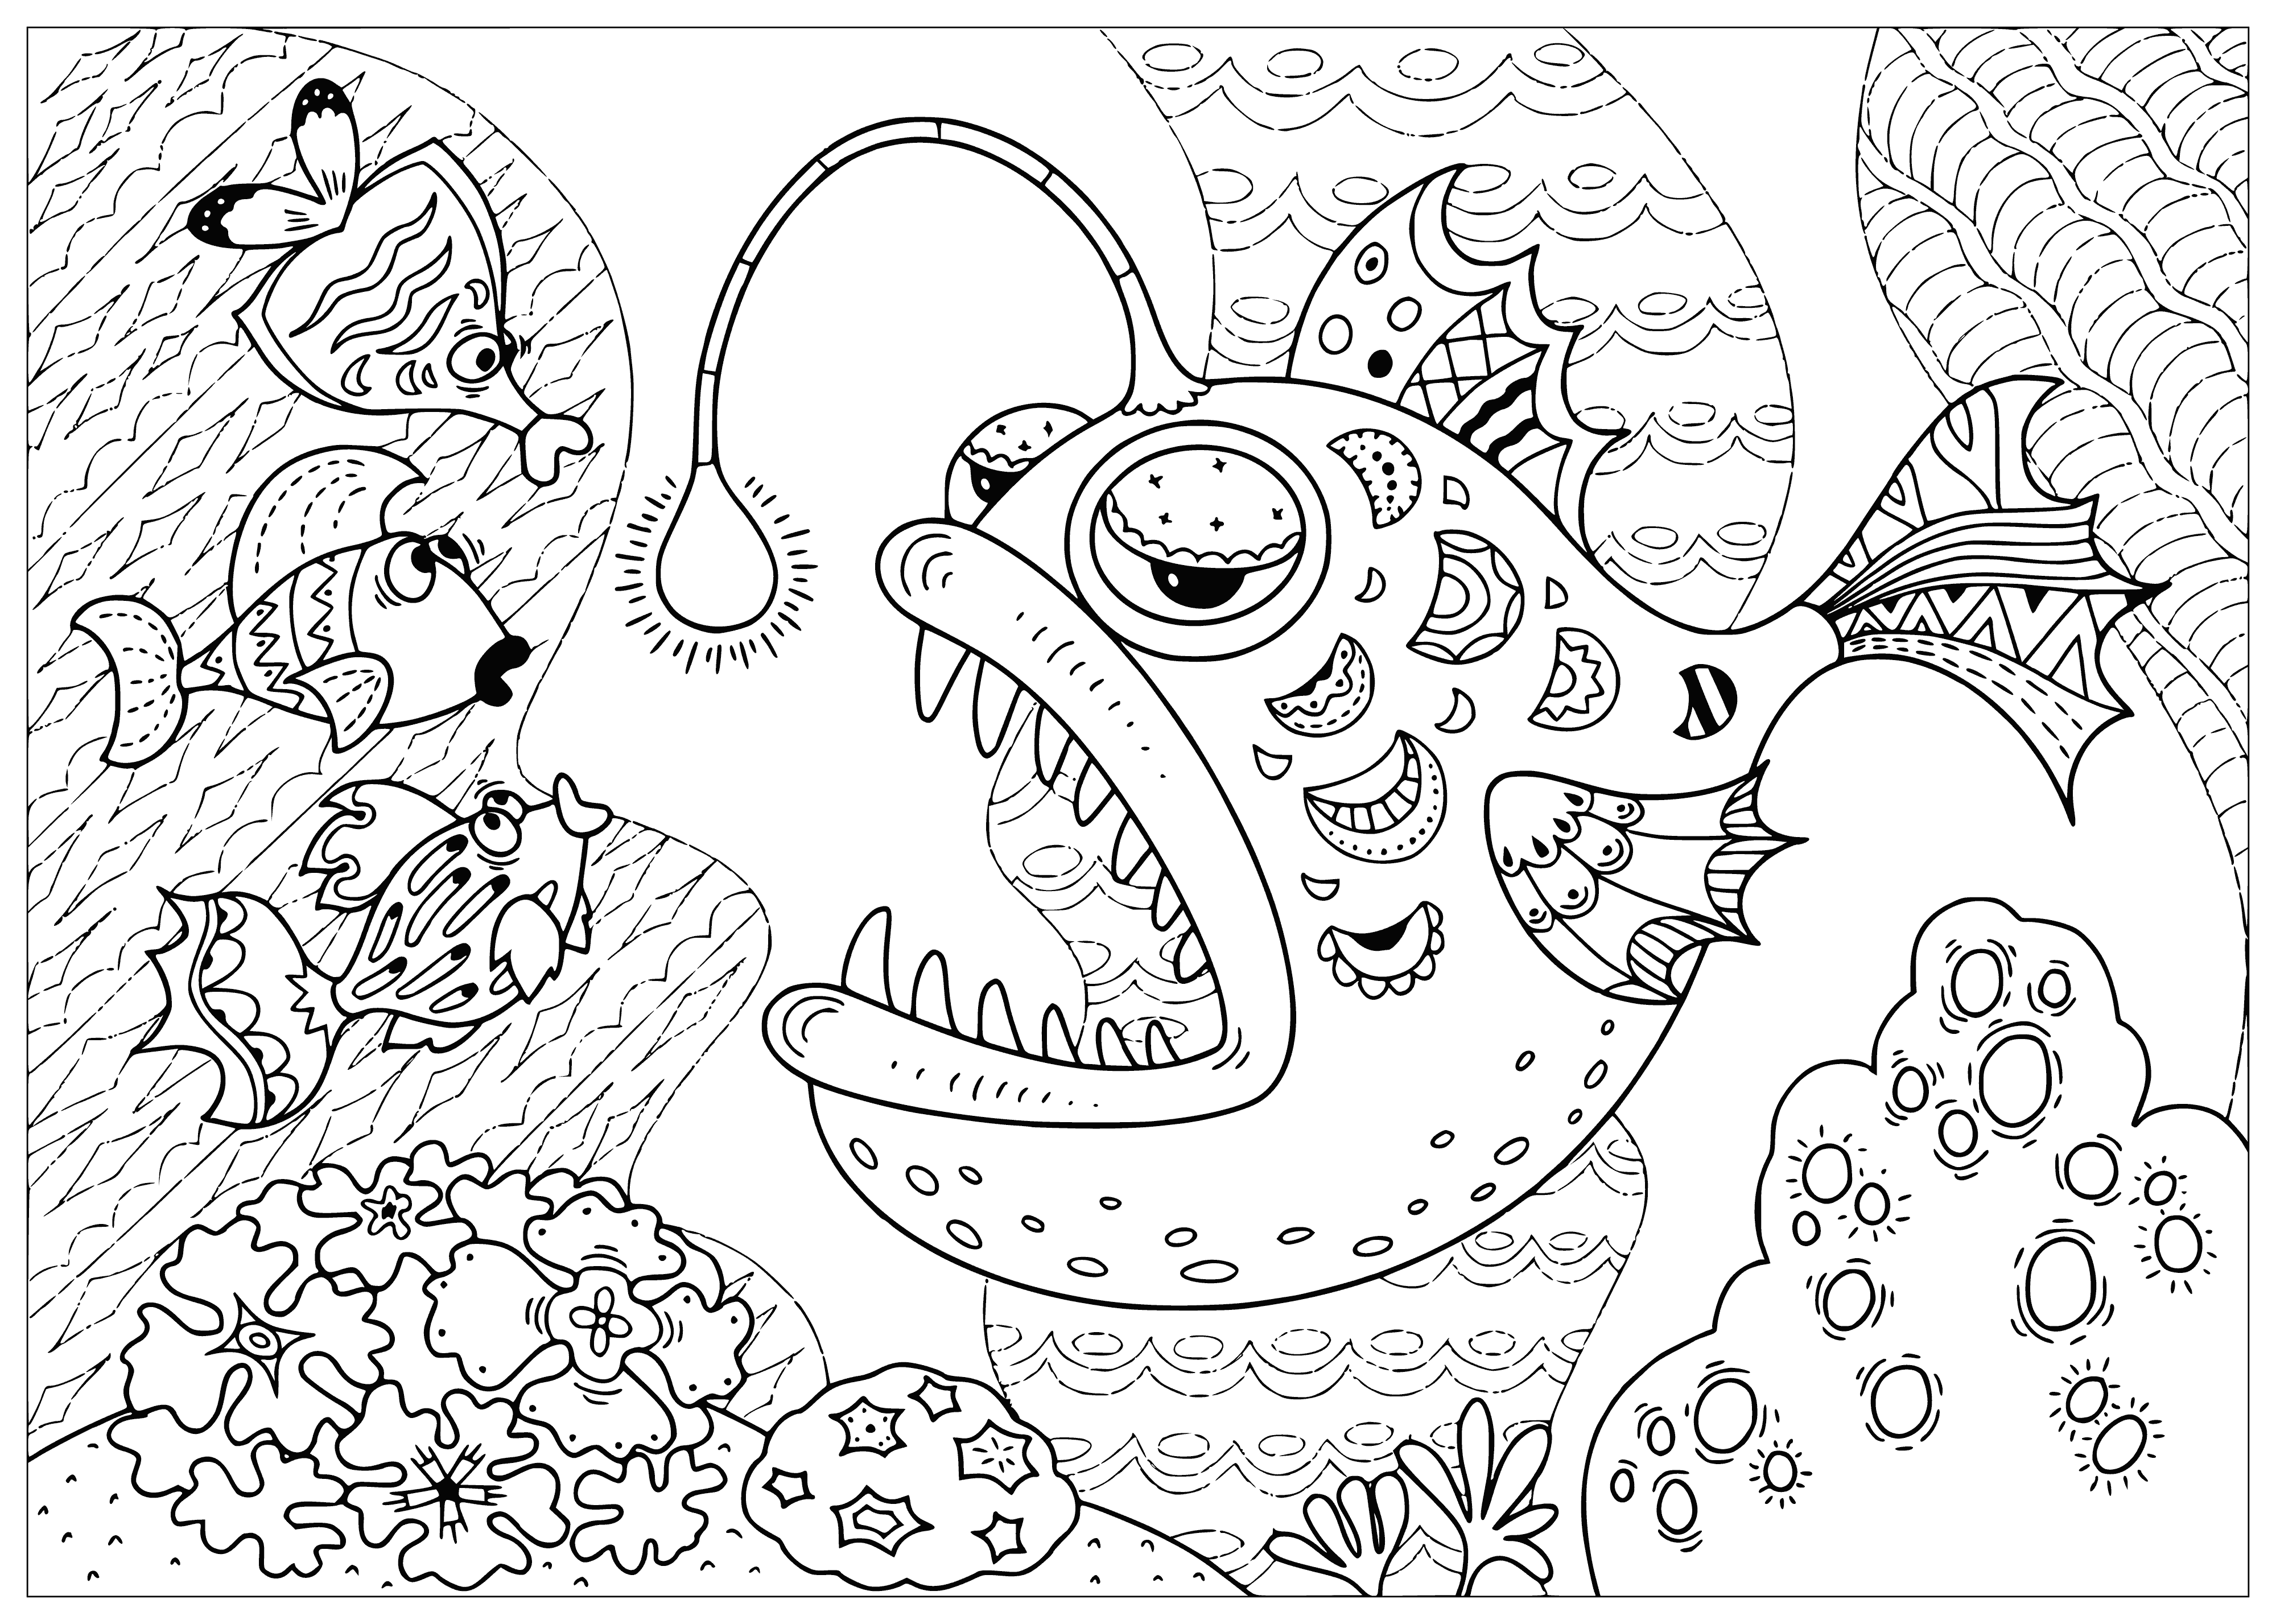 coloring page: Fish with streamers swims in blue water and coral with small colorful fish on left side of page. #coloring #fish #coral